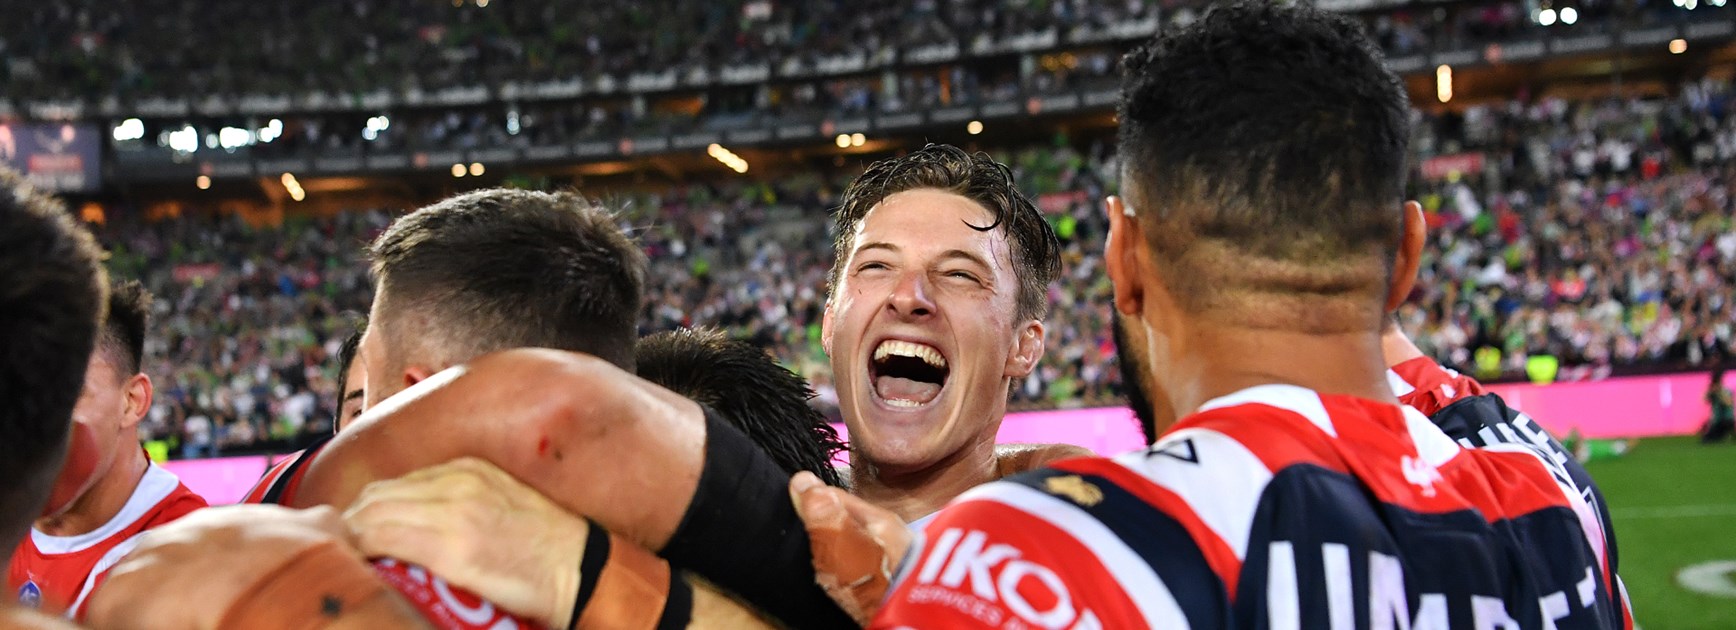 Sam Verrills moments after the Roosters won the 2019 NRL Grand Final.